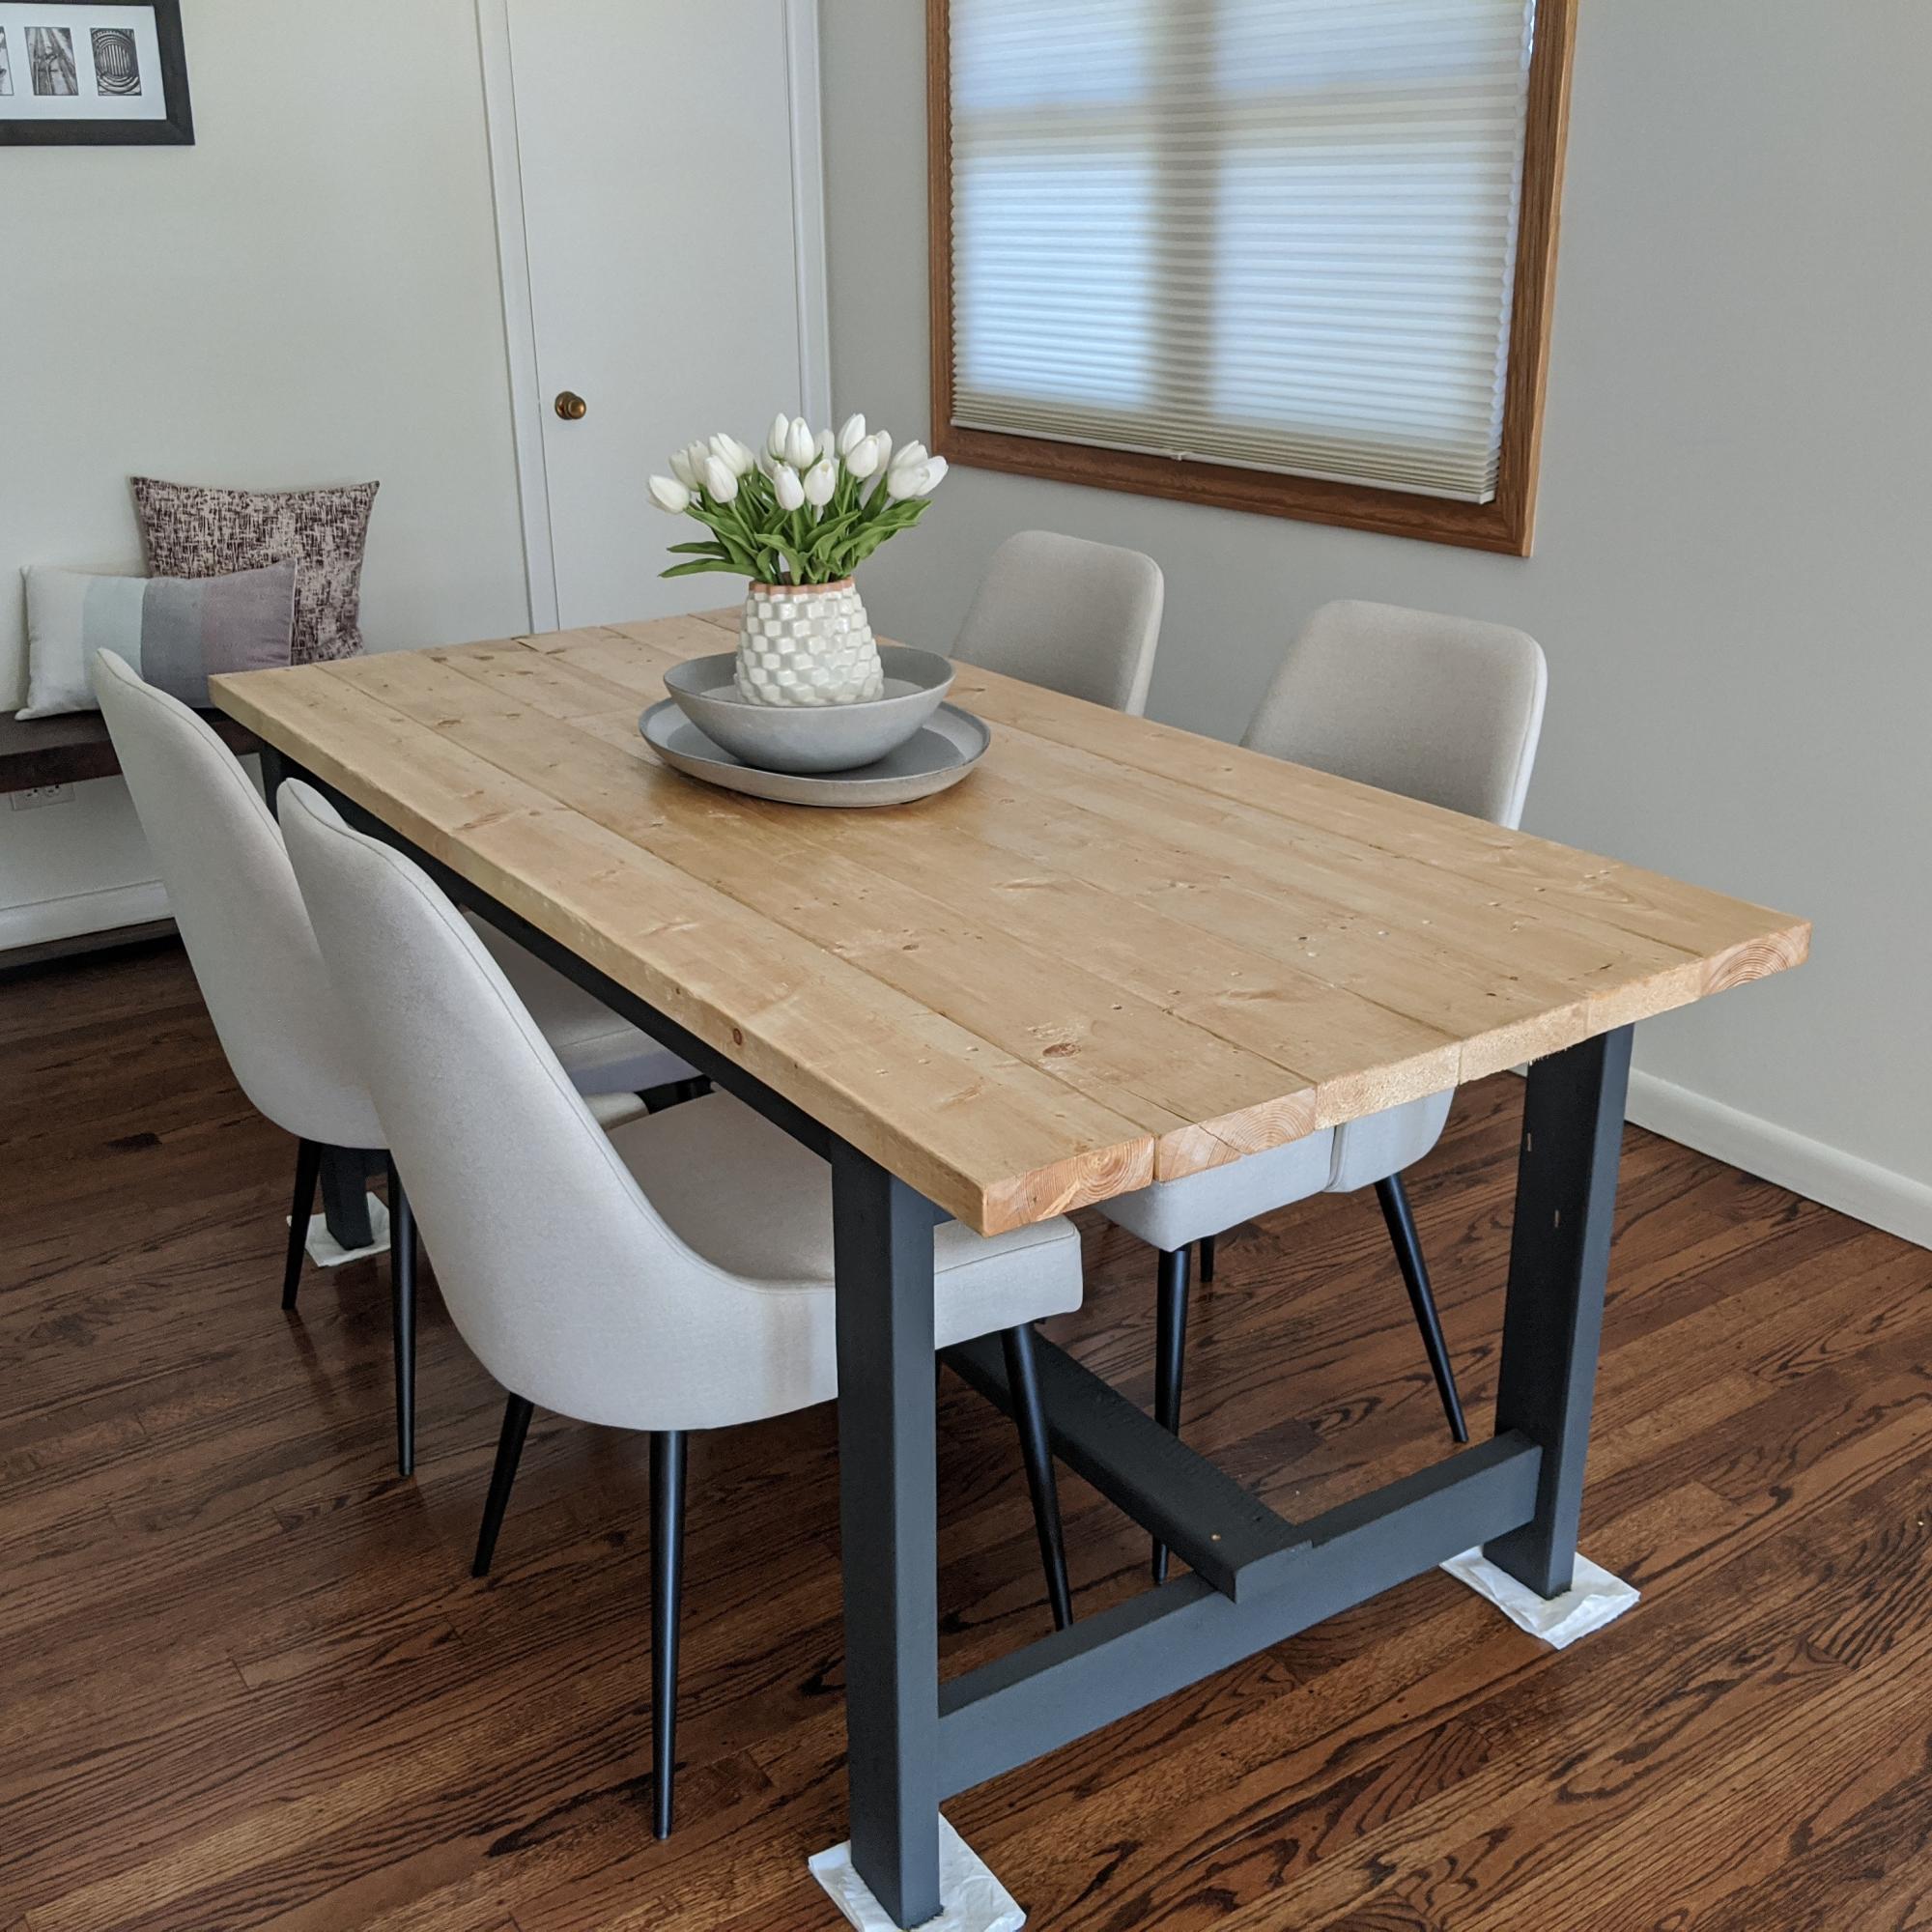 Beginner Farm Table 2 Tools 50, Dining Chairs Under 50 Dollars